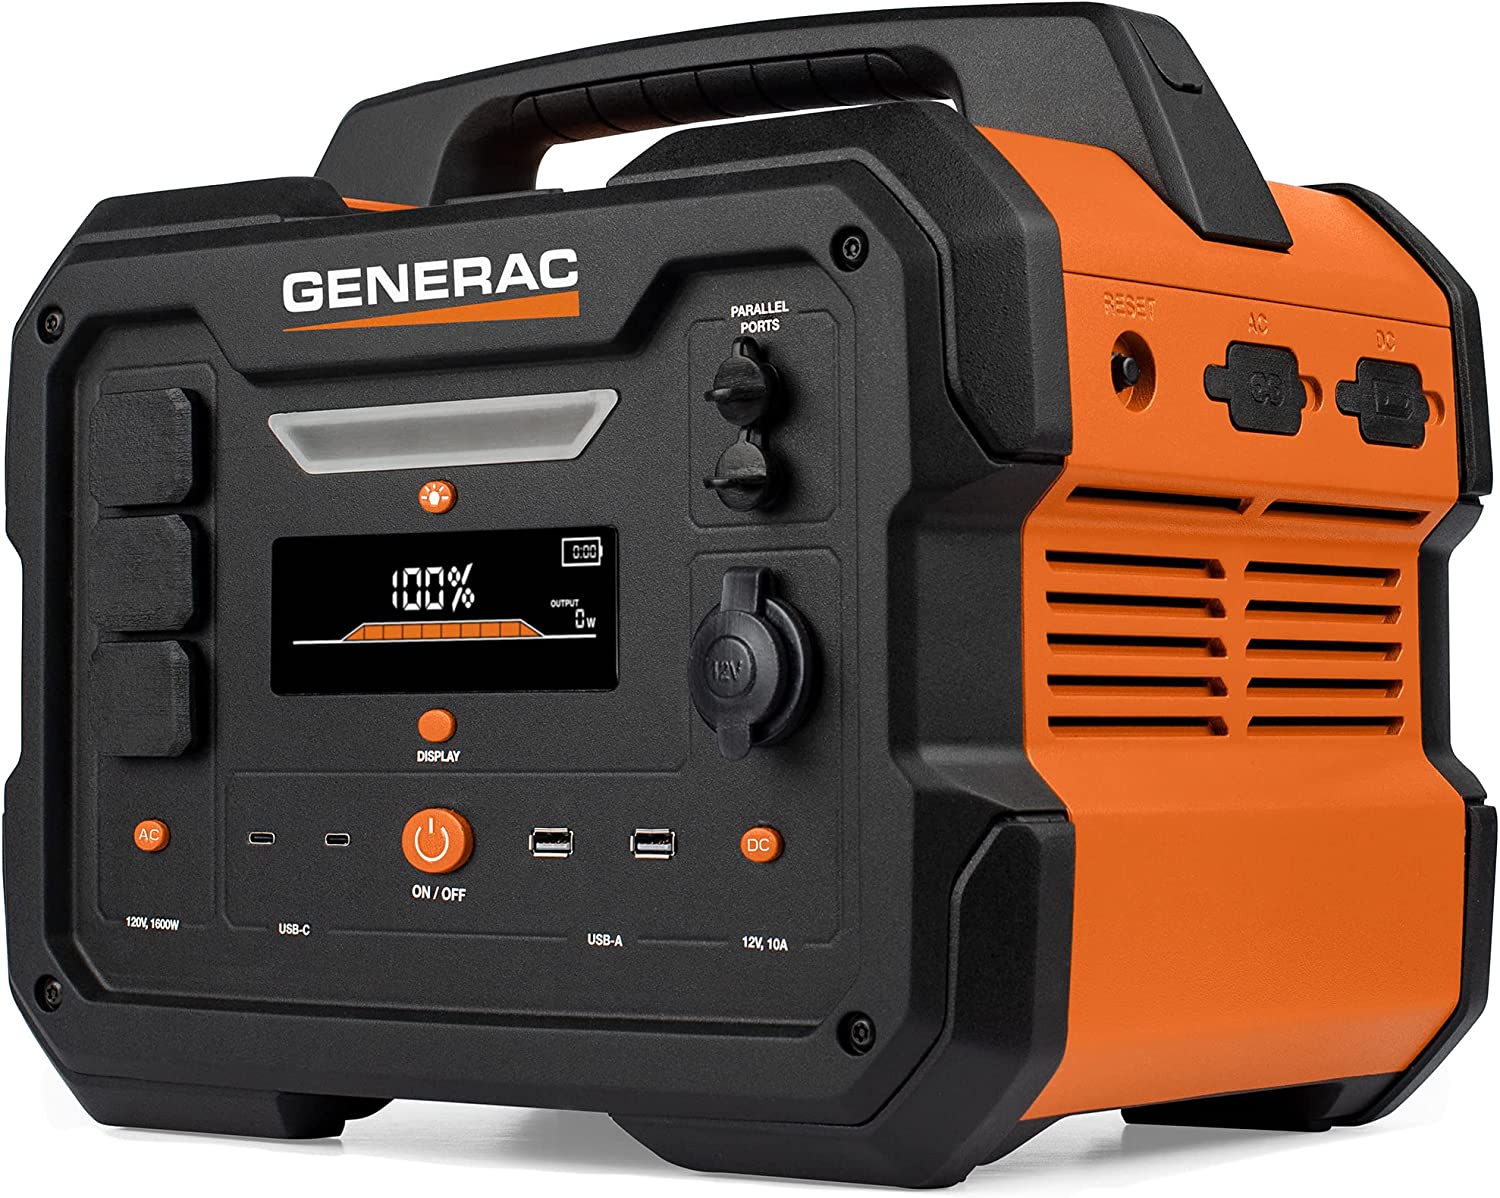 Generac GB1000 1086Wh Portable Battery Power Station Generator with Lithium-Ion NMC, Fast Solar Charging, Wireless Charging Pad for Camping, RV, Indoor/Outdoor Use